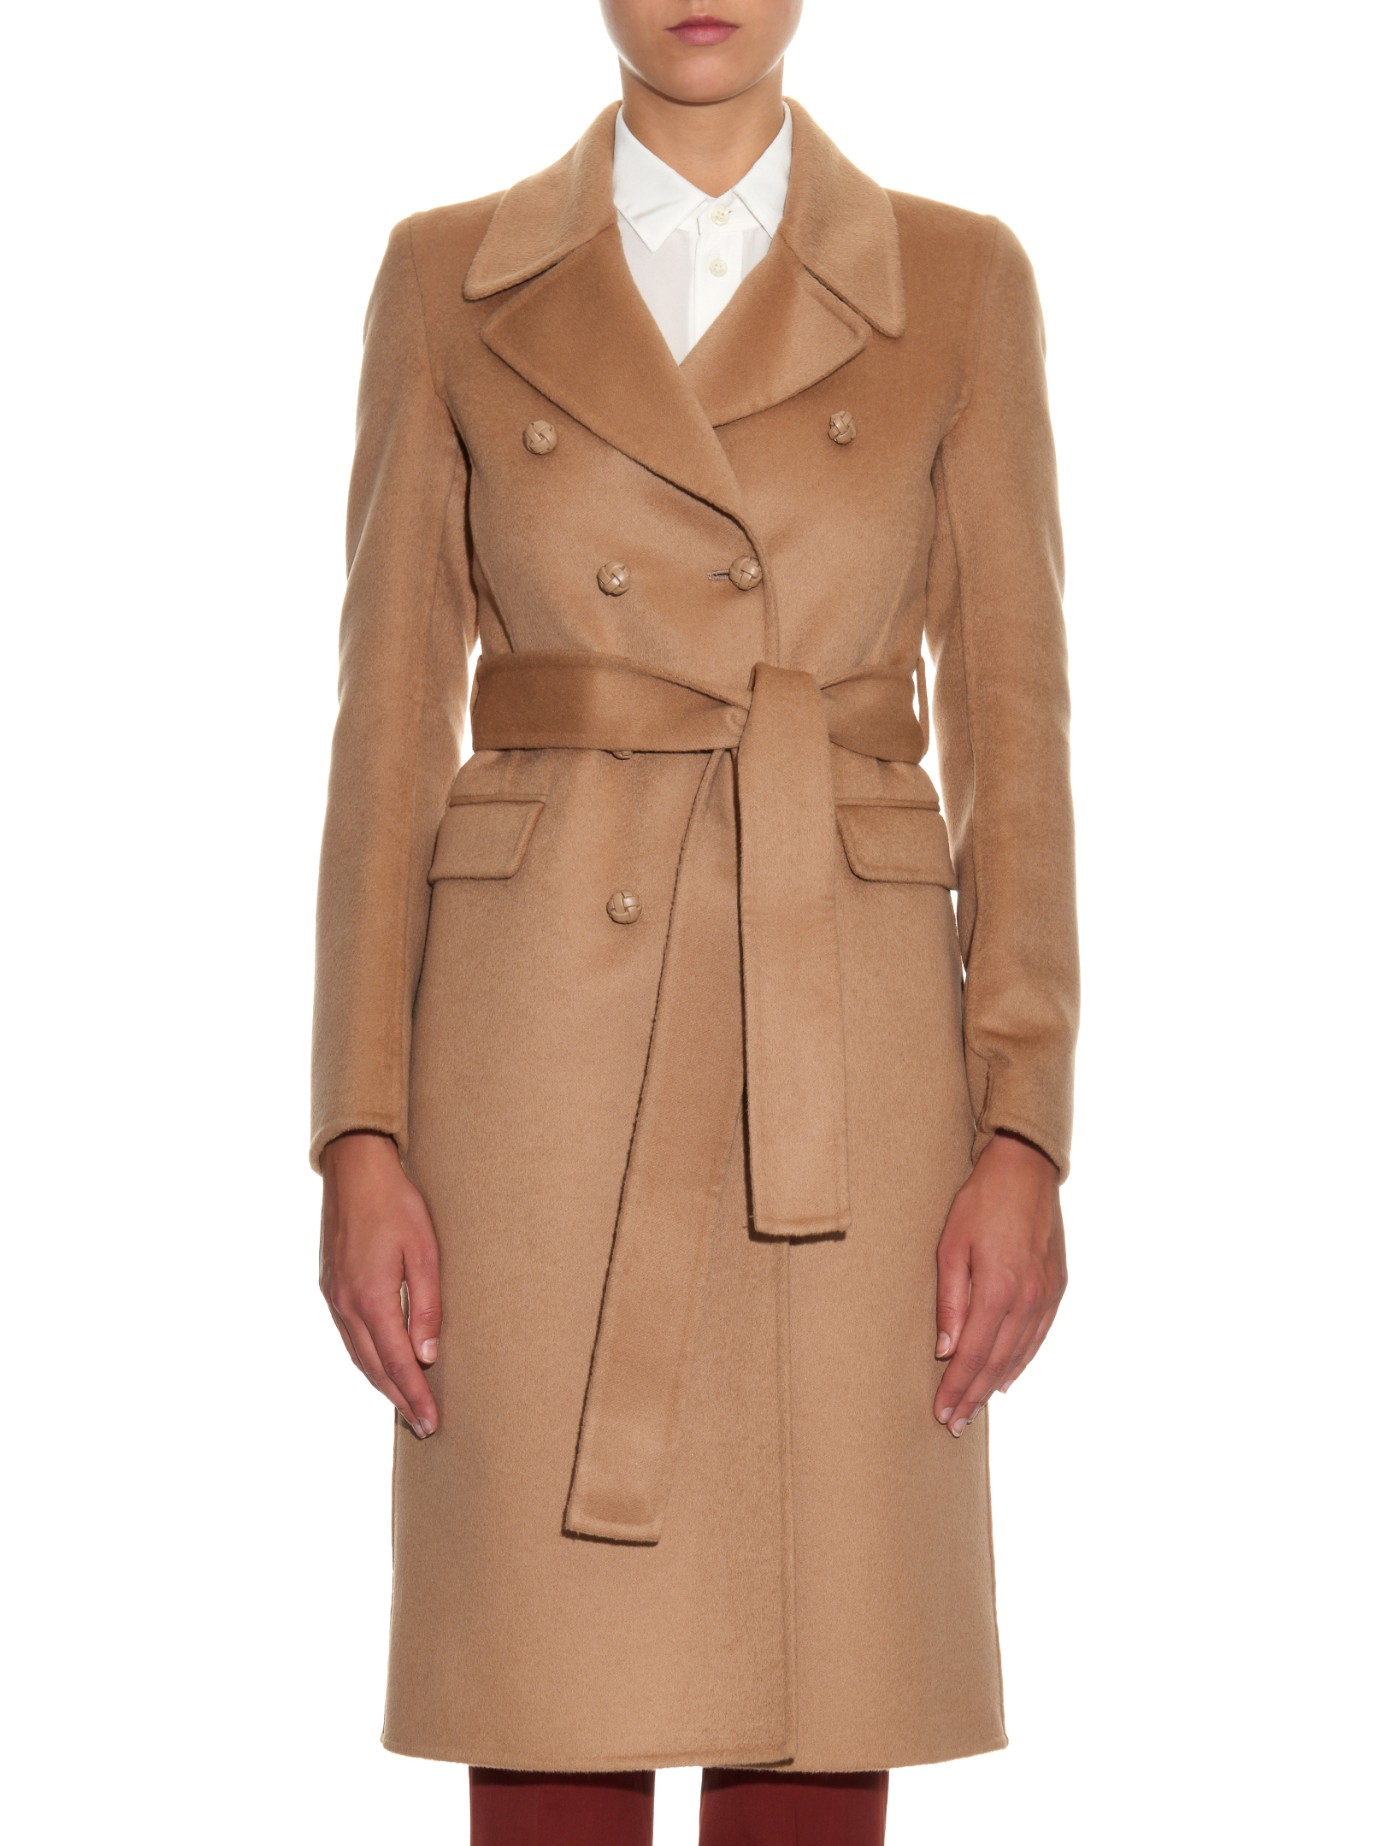 Lyst - Gucci Wool-blend Trench Coat in Brown